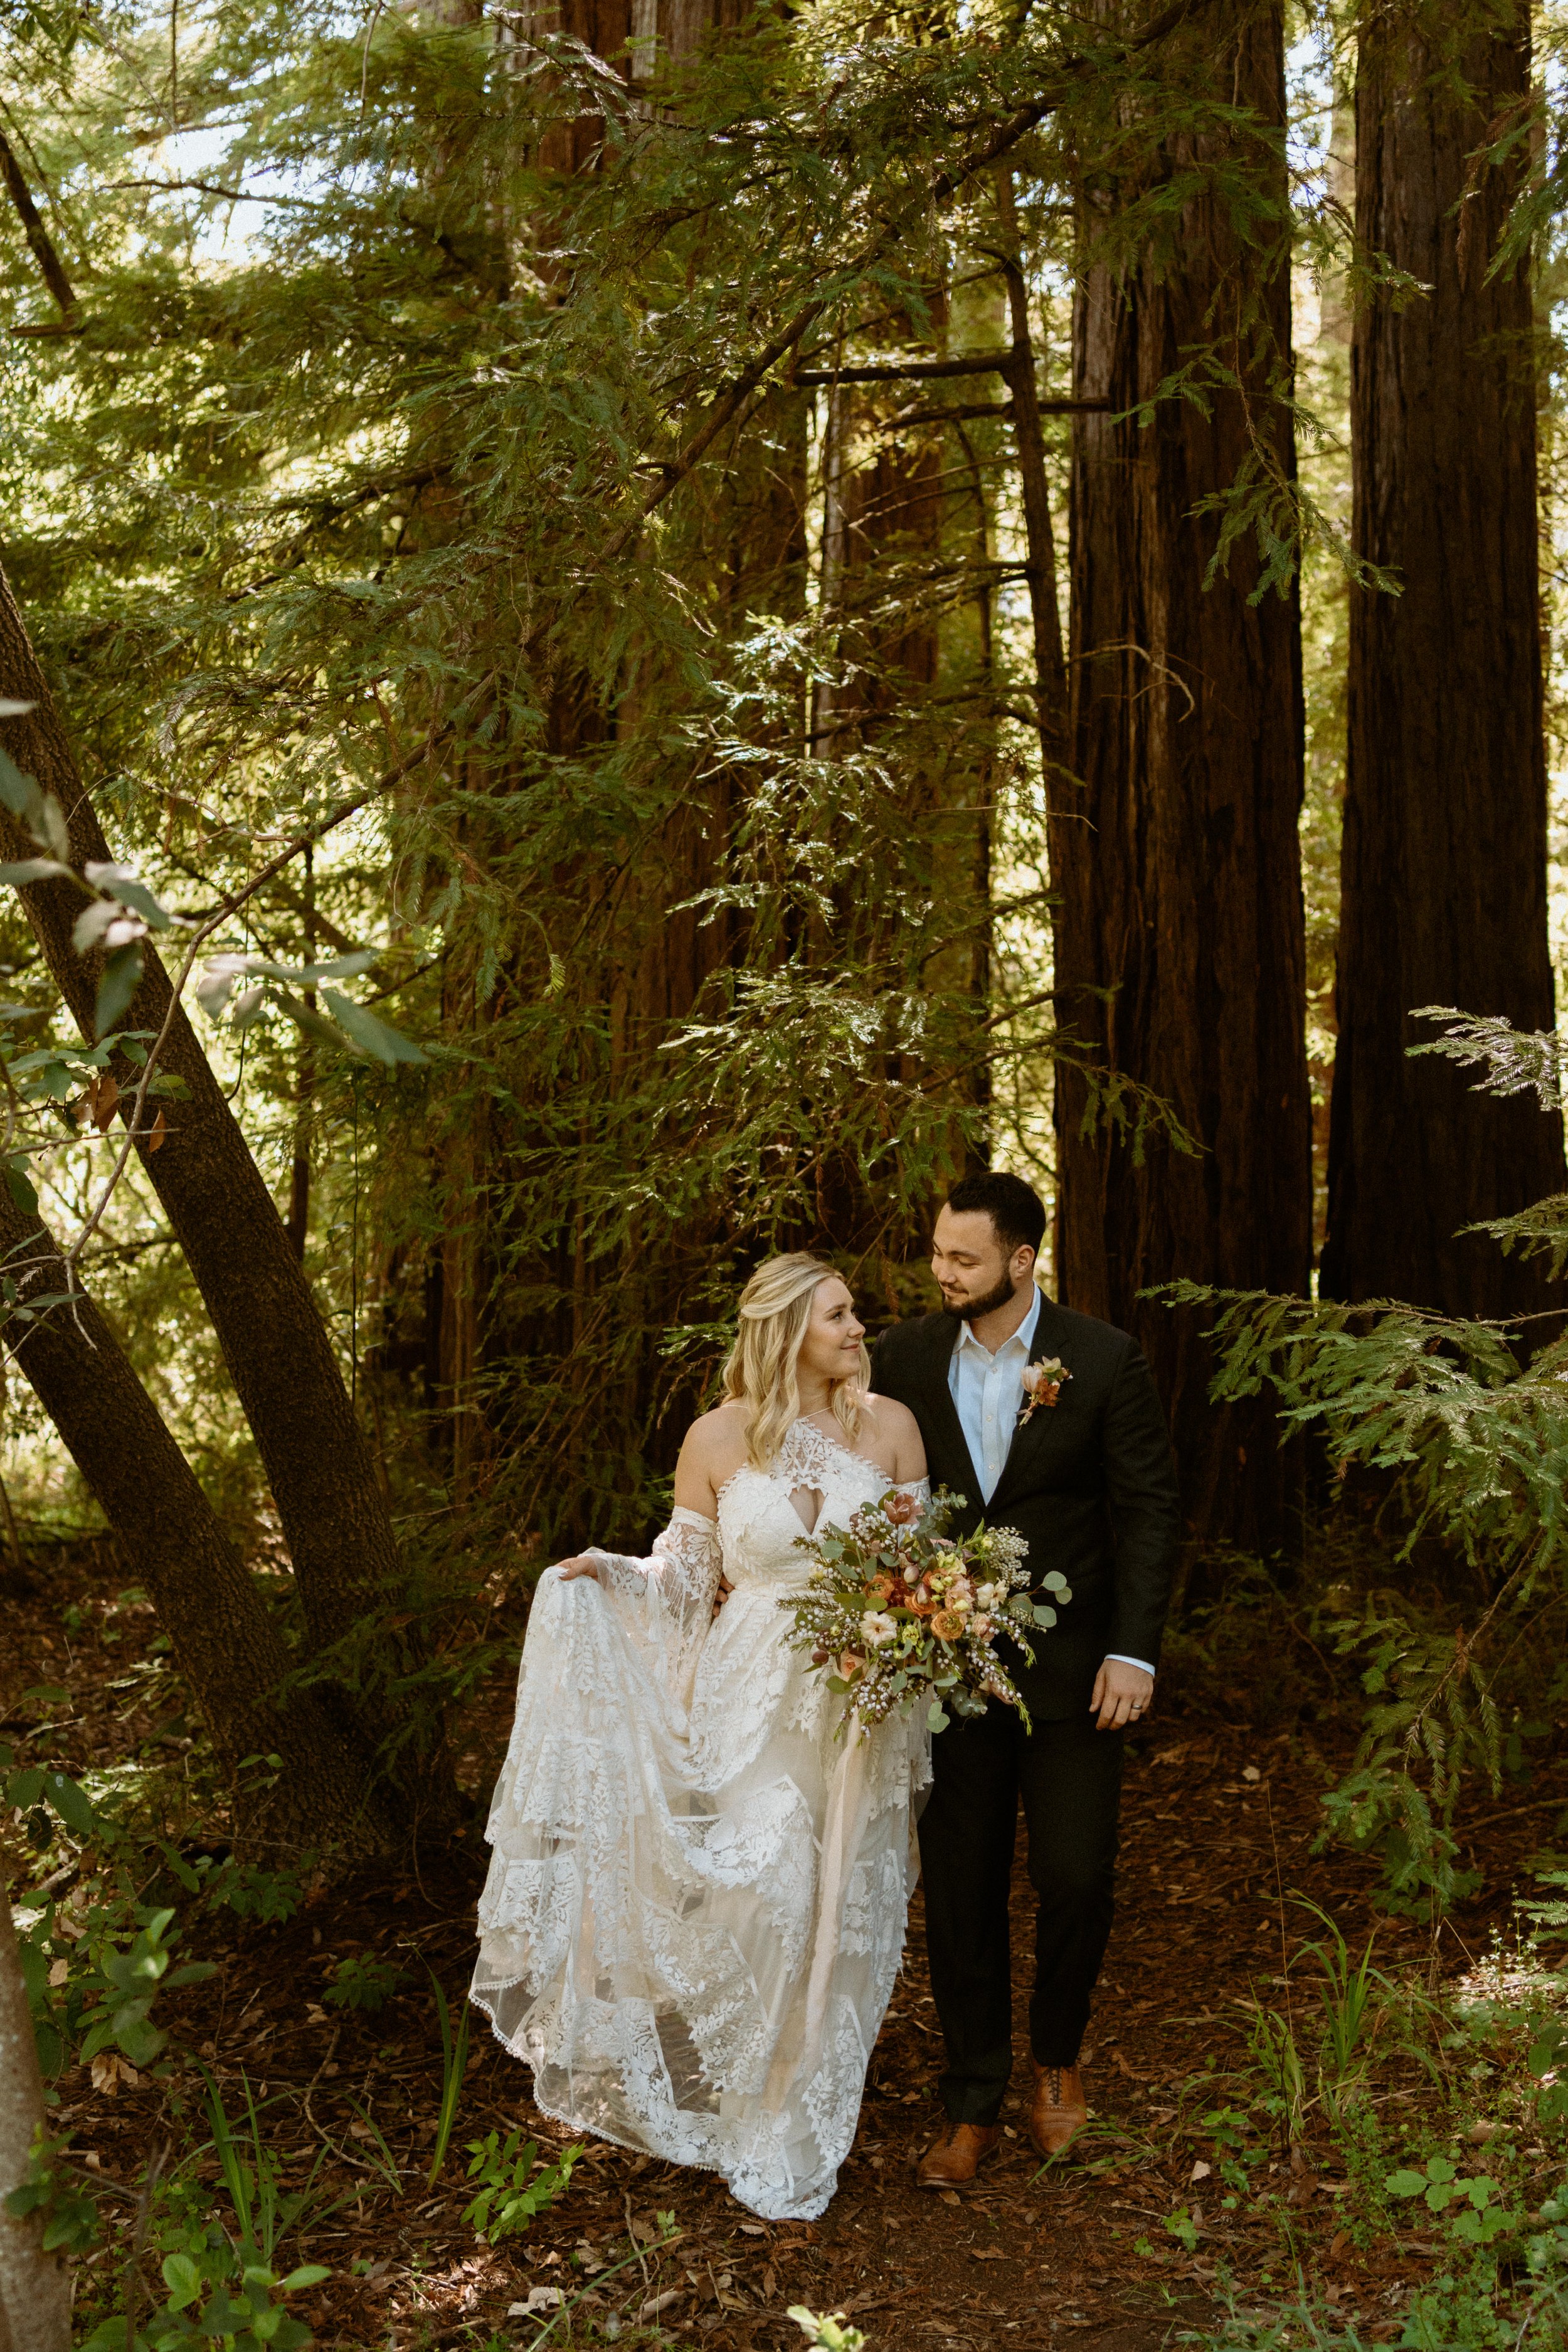 Best Place to Elope in California | Big Sur | Big Sur Elopement Photographer | California Elopement Photographer | Elopement Tips | Big Sur Elopement | Coastal Elopement 